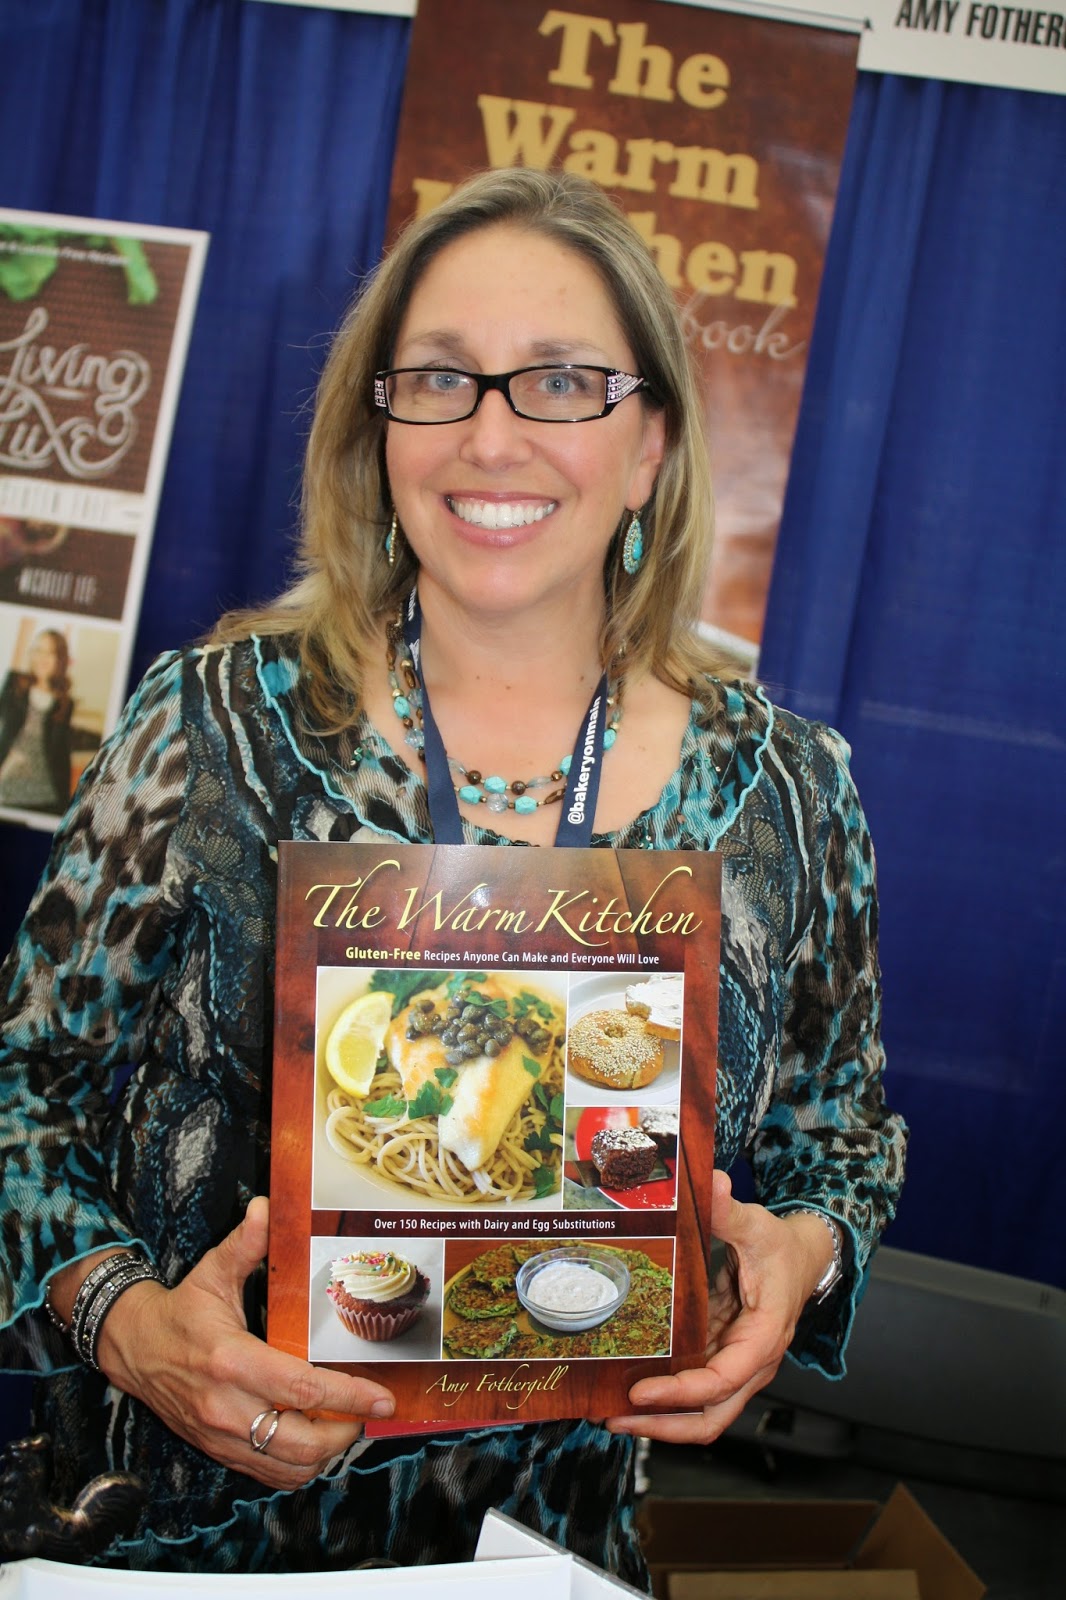 Amy from Amythefamilychef.com holding her cookbook "The Warm Kitchen"